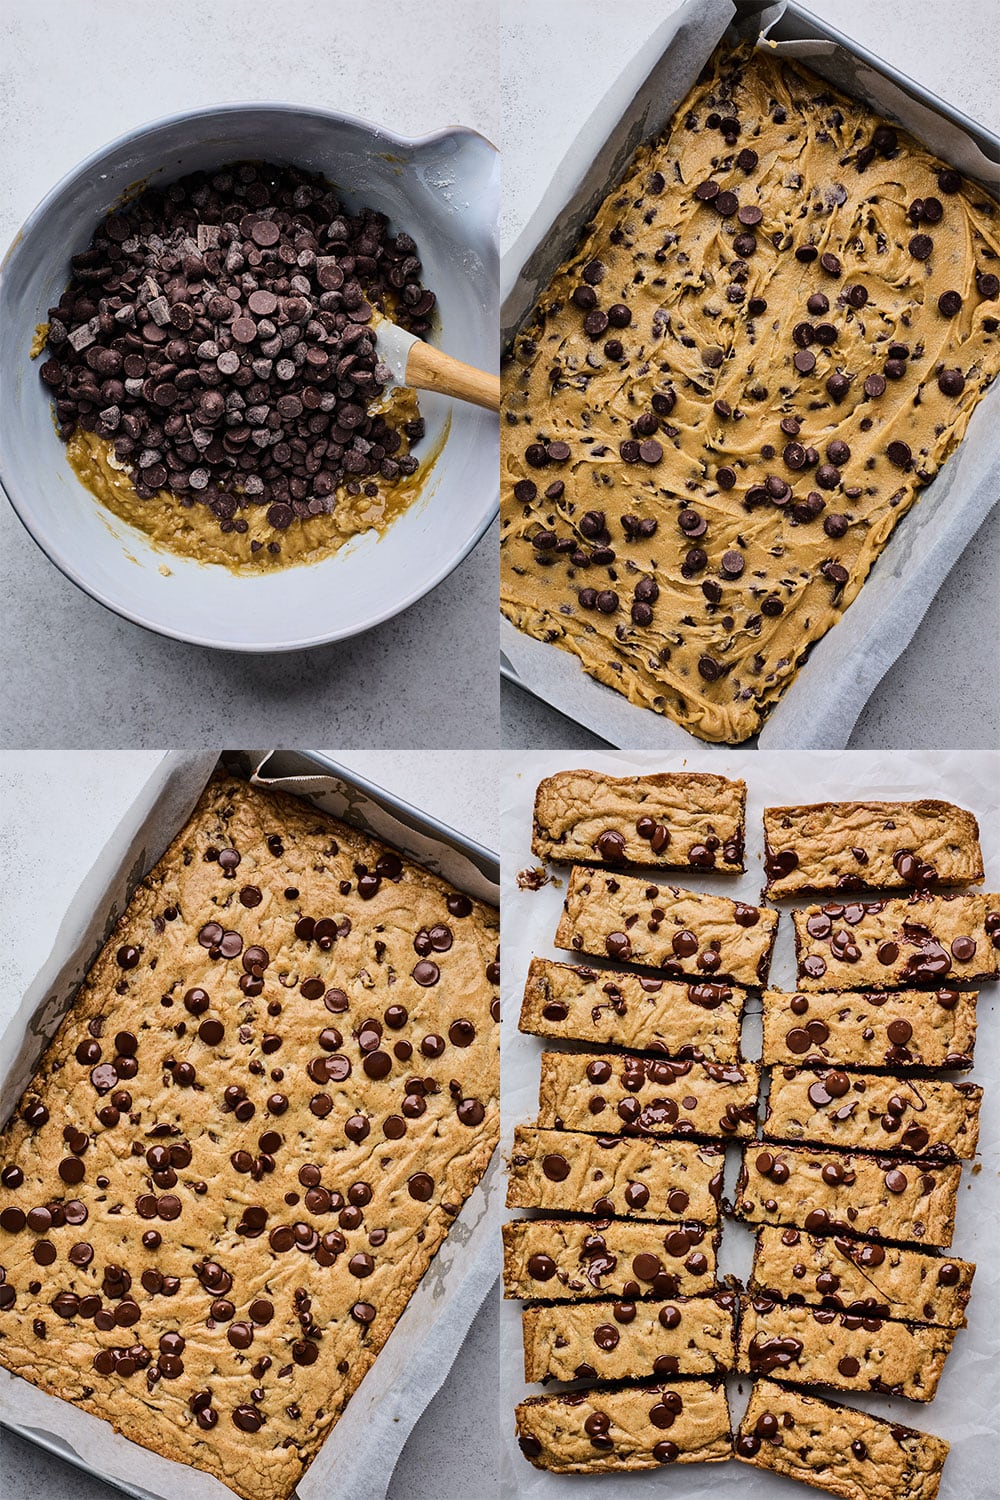 Classic Chocolate Chip Cookie Bars step by step directions